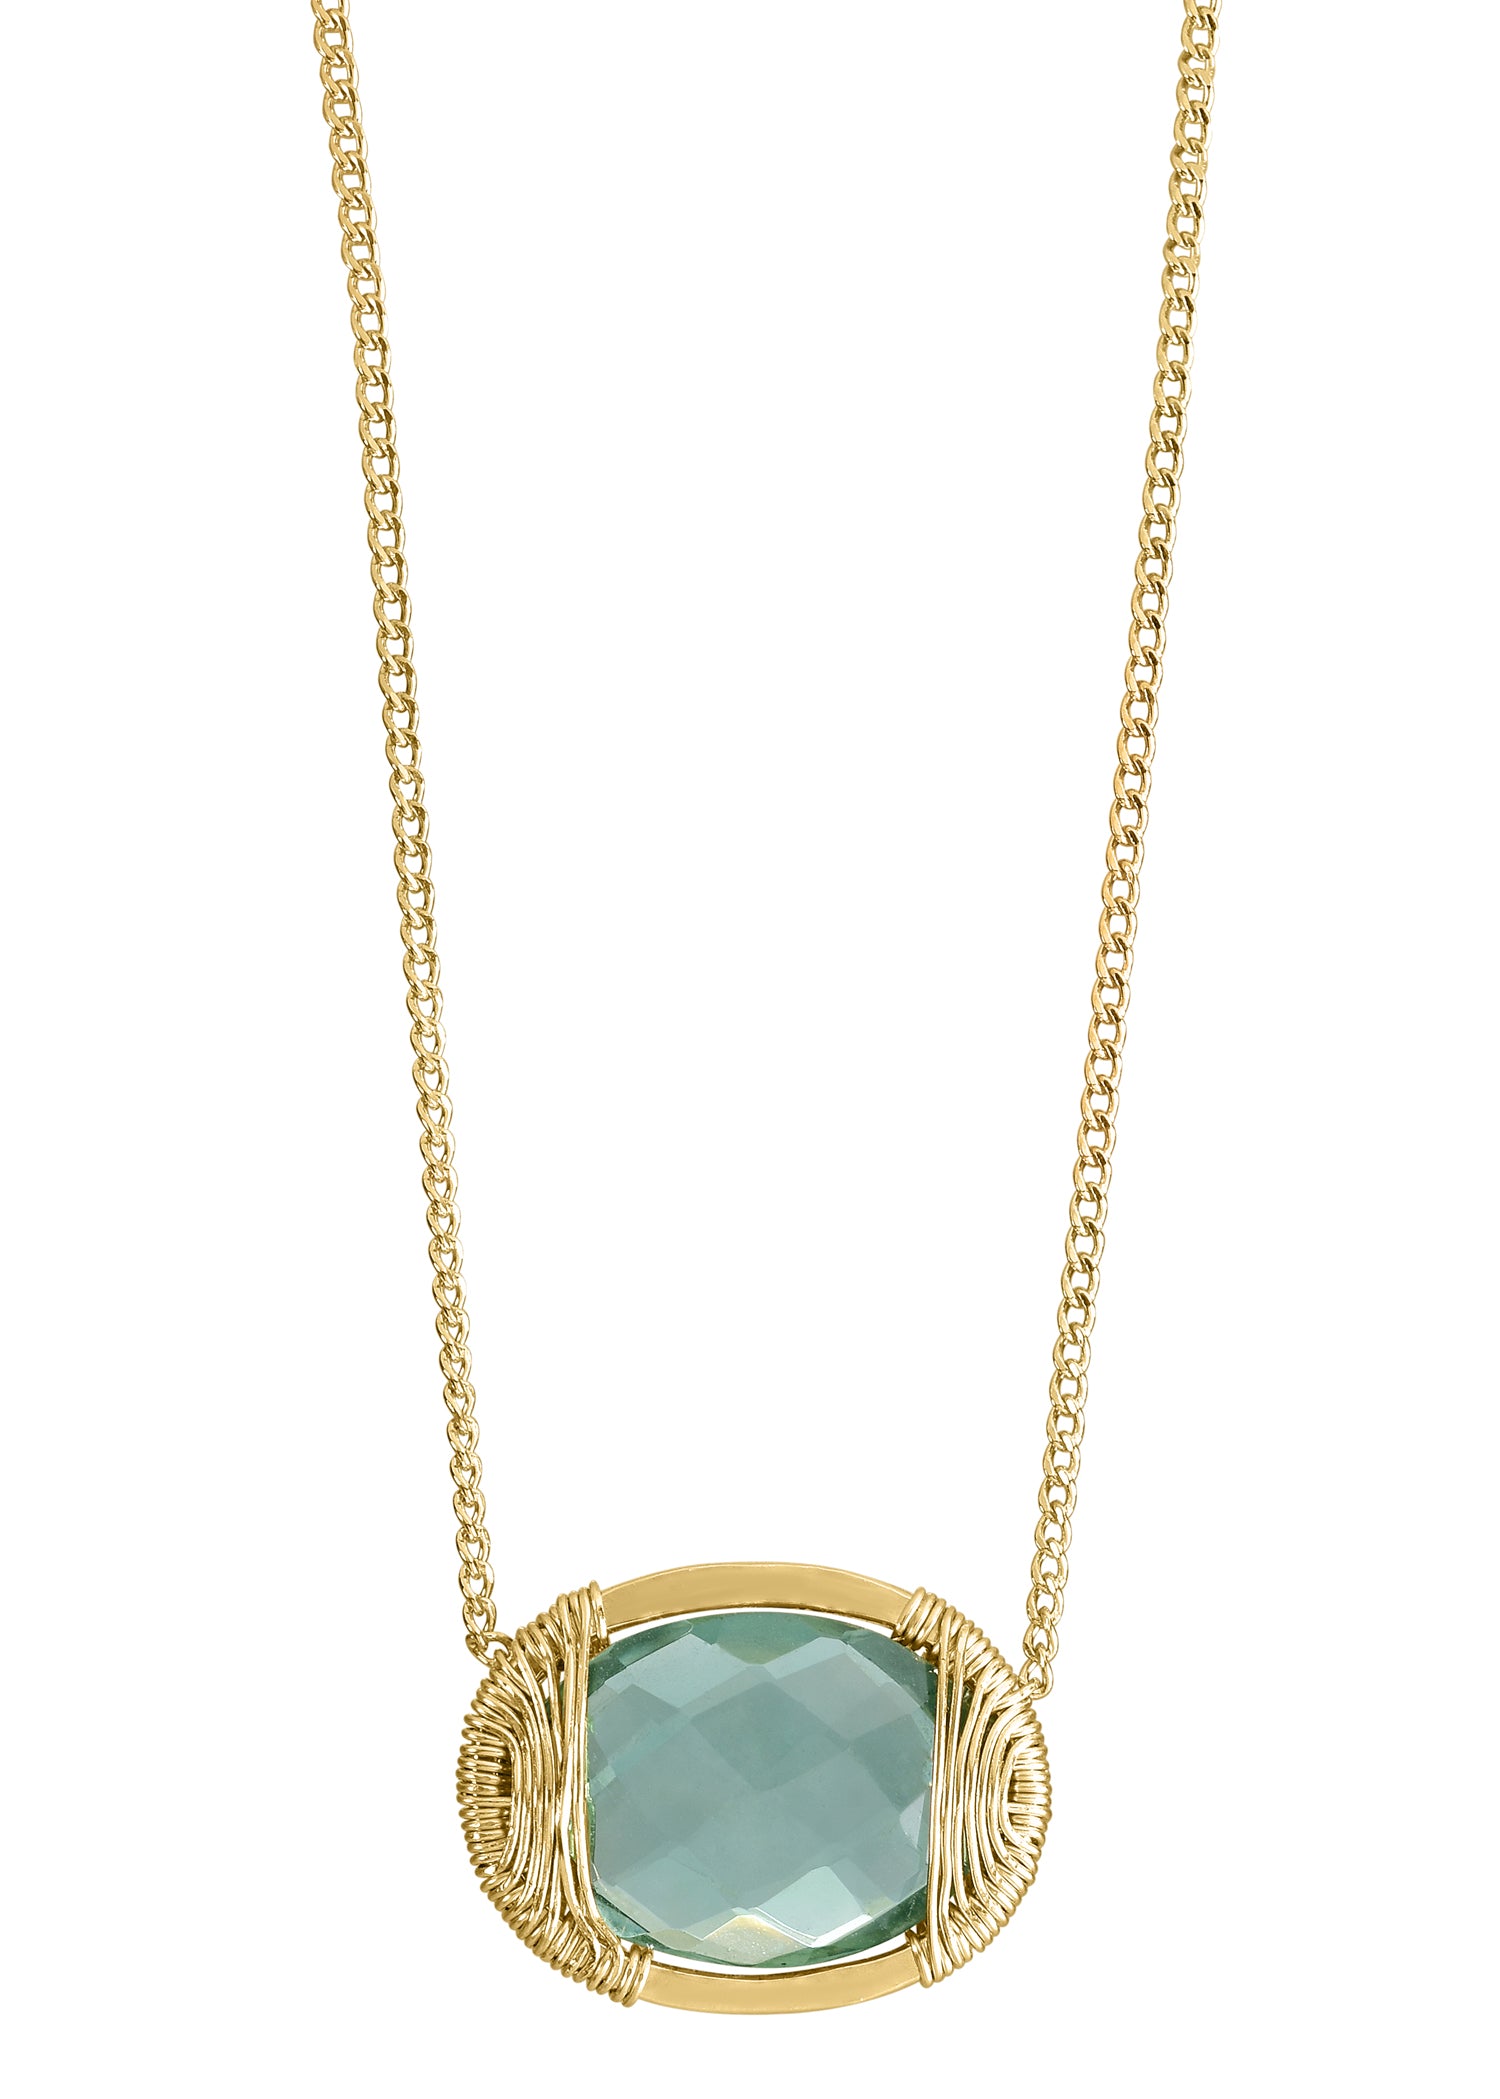 Green quartz 14k gold fill Necklace measures 16" in length Pendant measures 7/16" in length and 5/8" in width Handmade in our Los Angeles studio